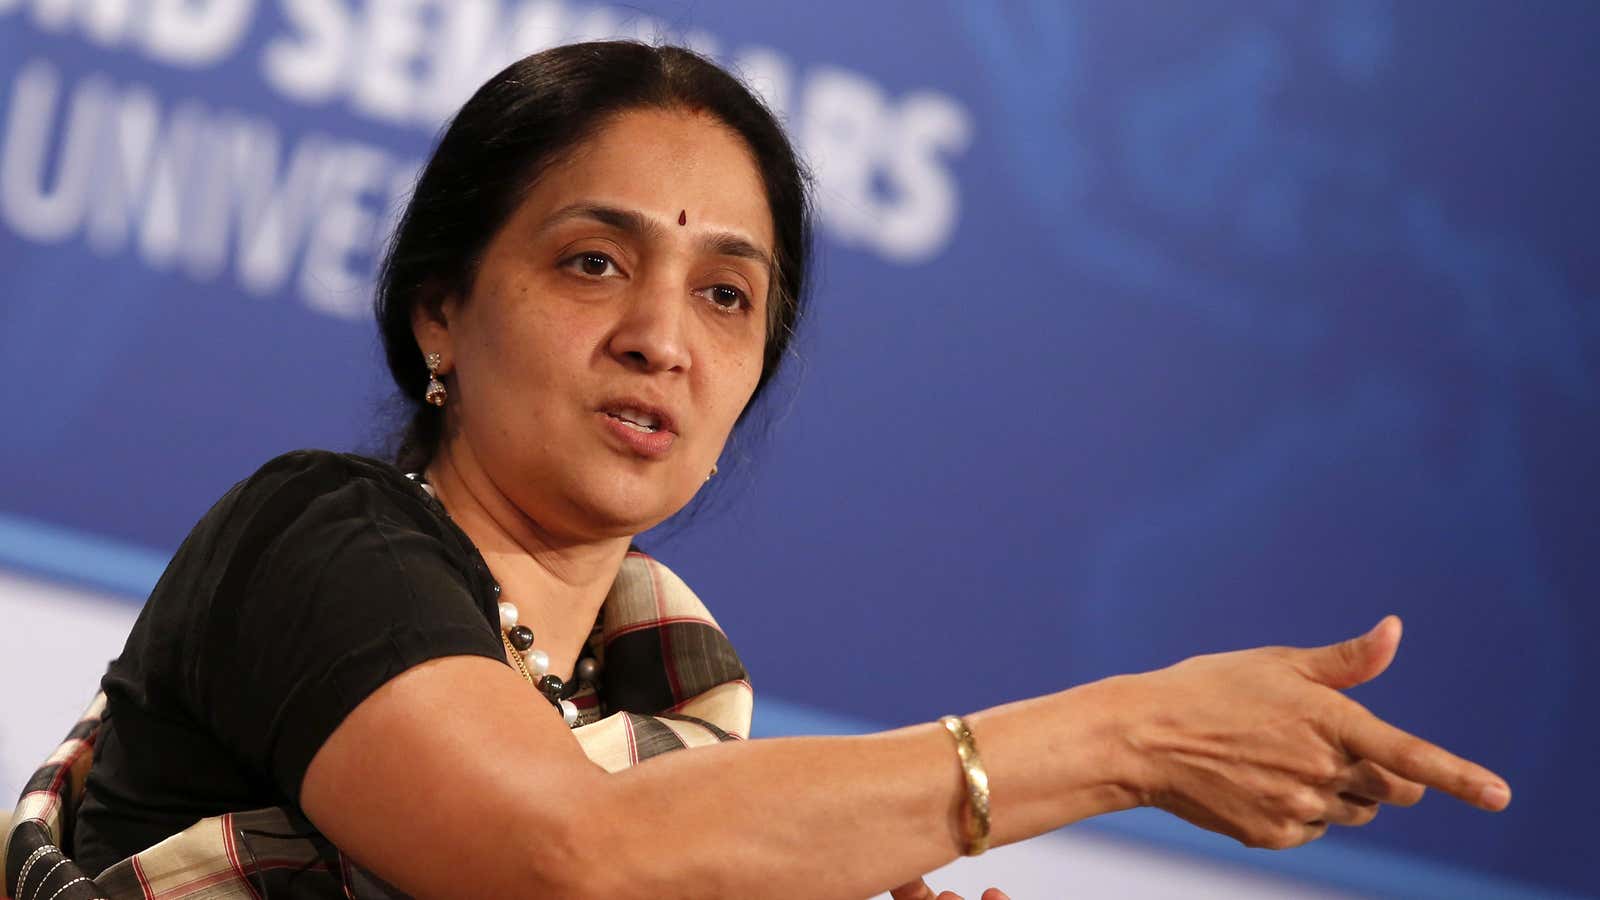 Chitra Ramkrishna, Managing Director and CEO, National Stock Exchange (India), participates in The Future of Finance panel discussion during the IMF-World Bank annual meetings in…